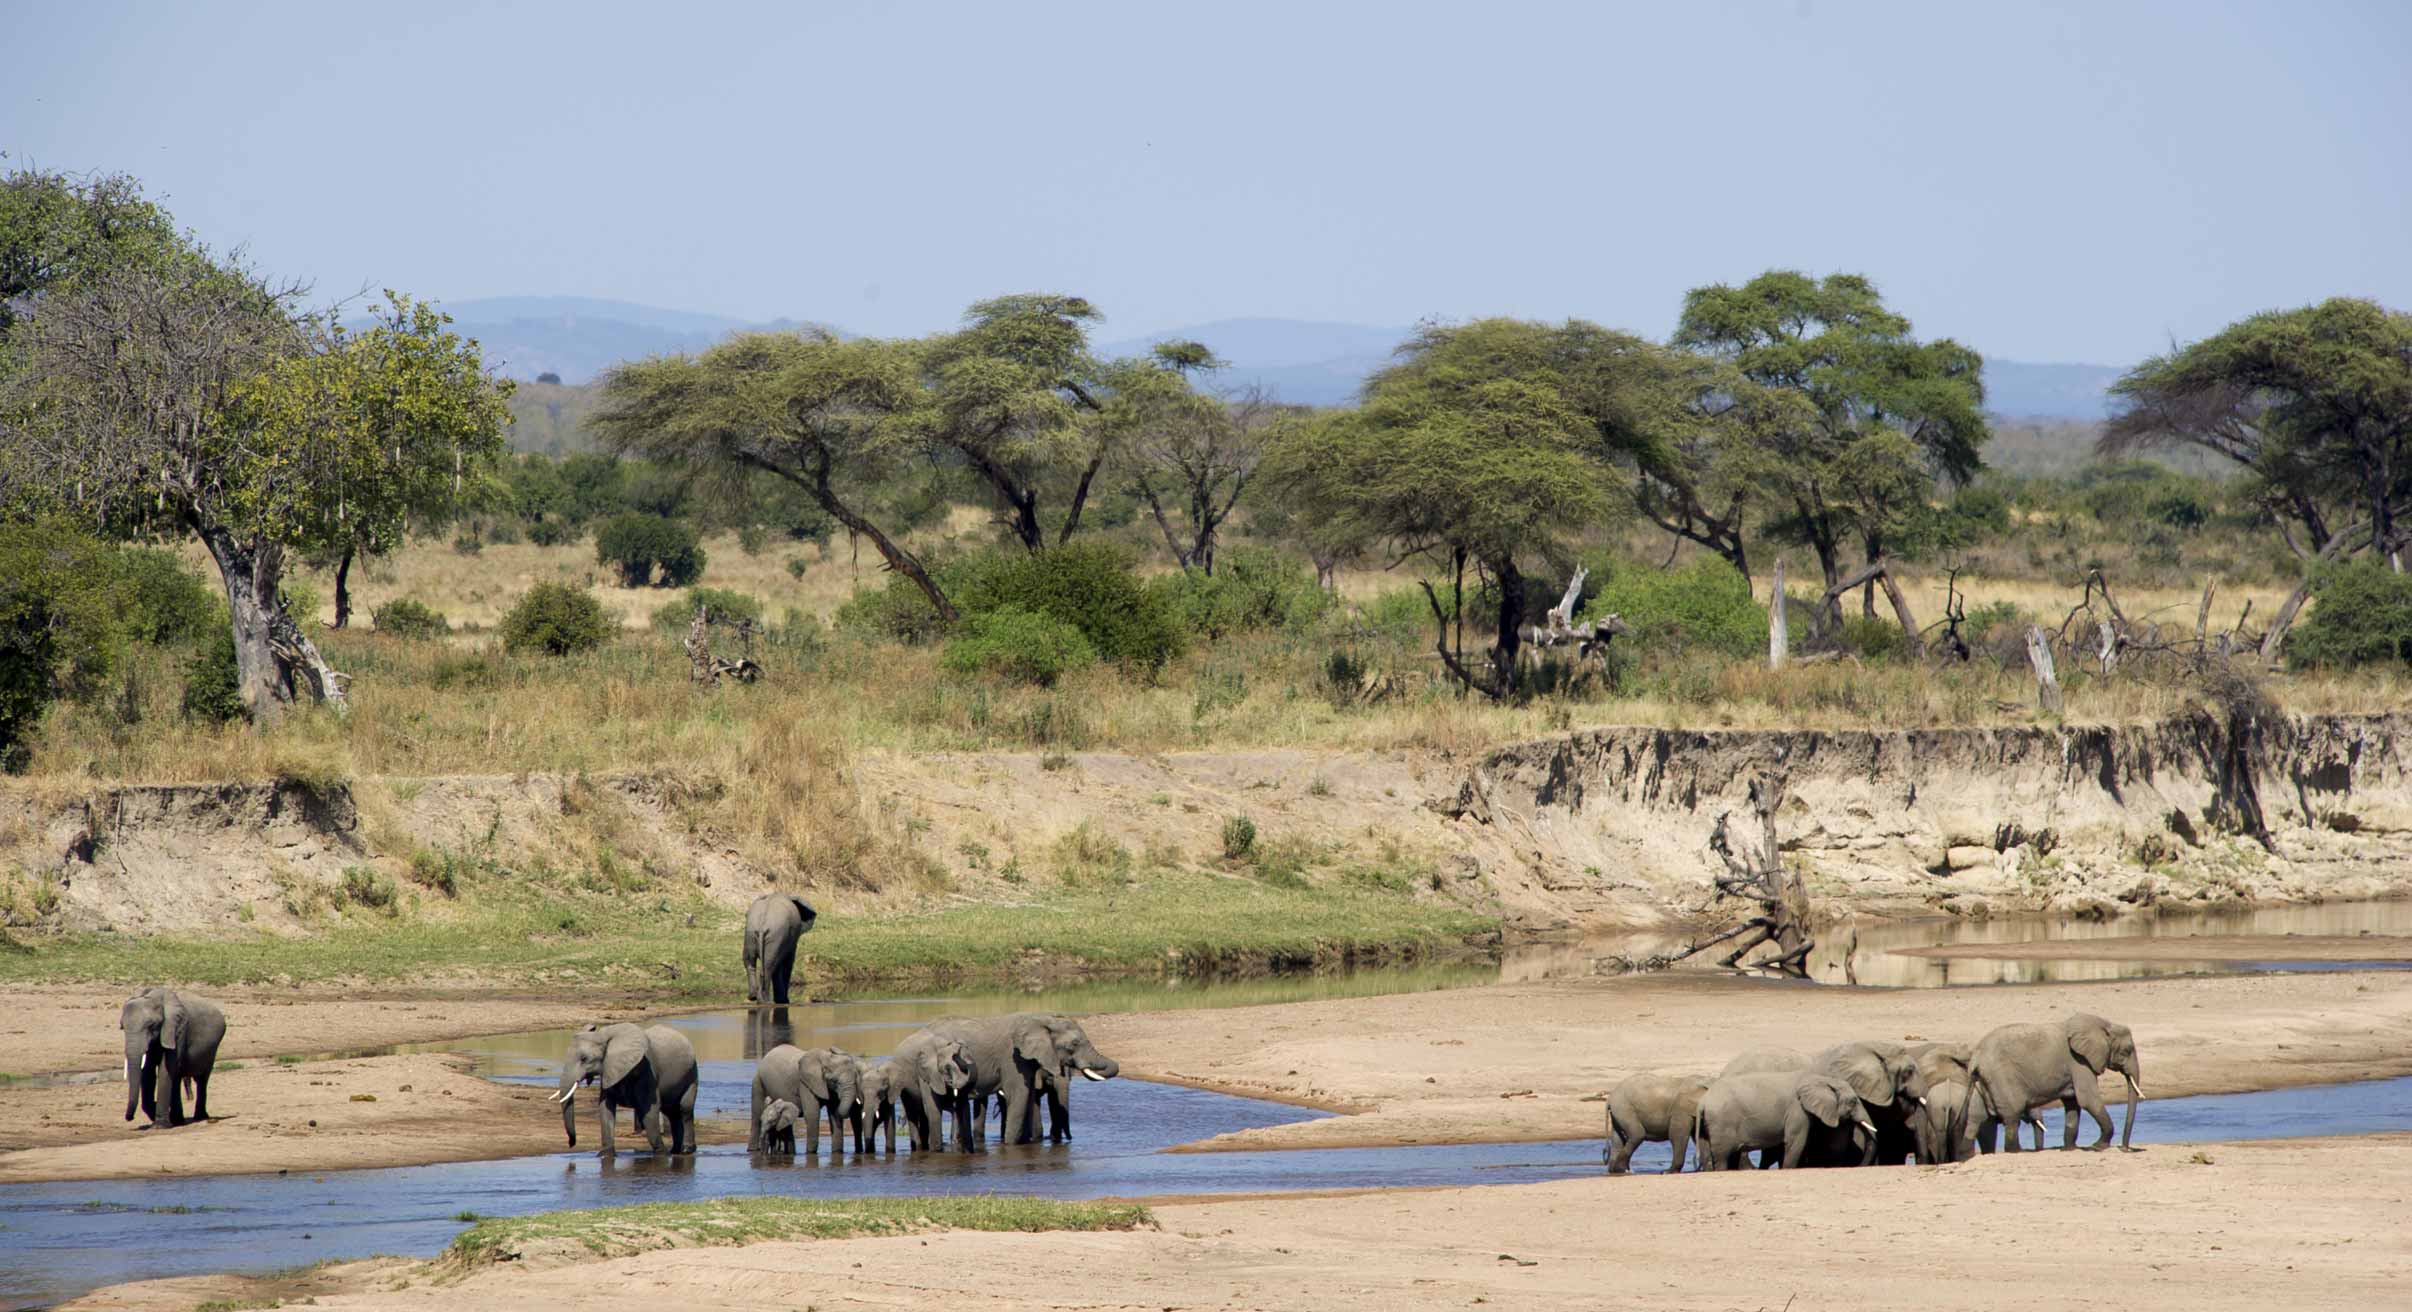 Elephants in Nyerere National Park in Tanzania